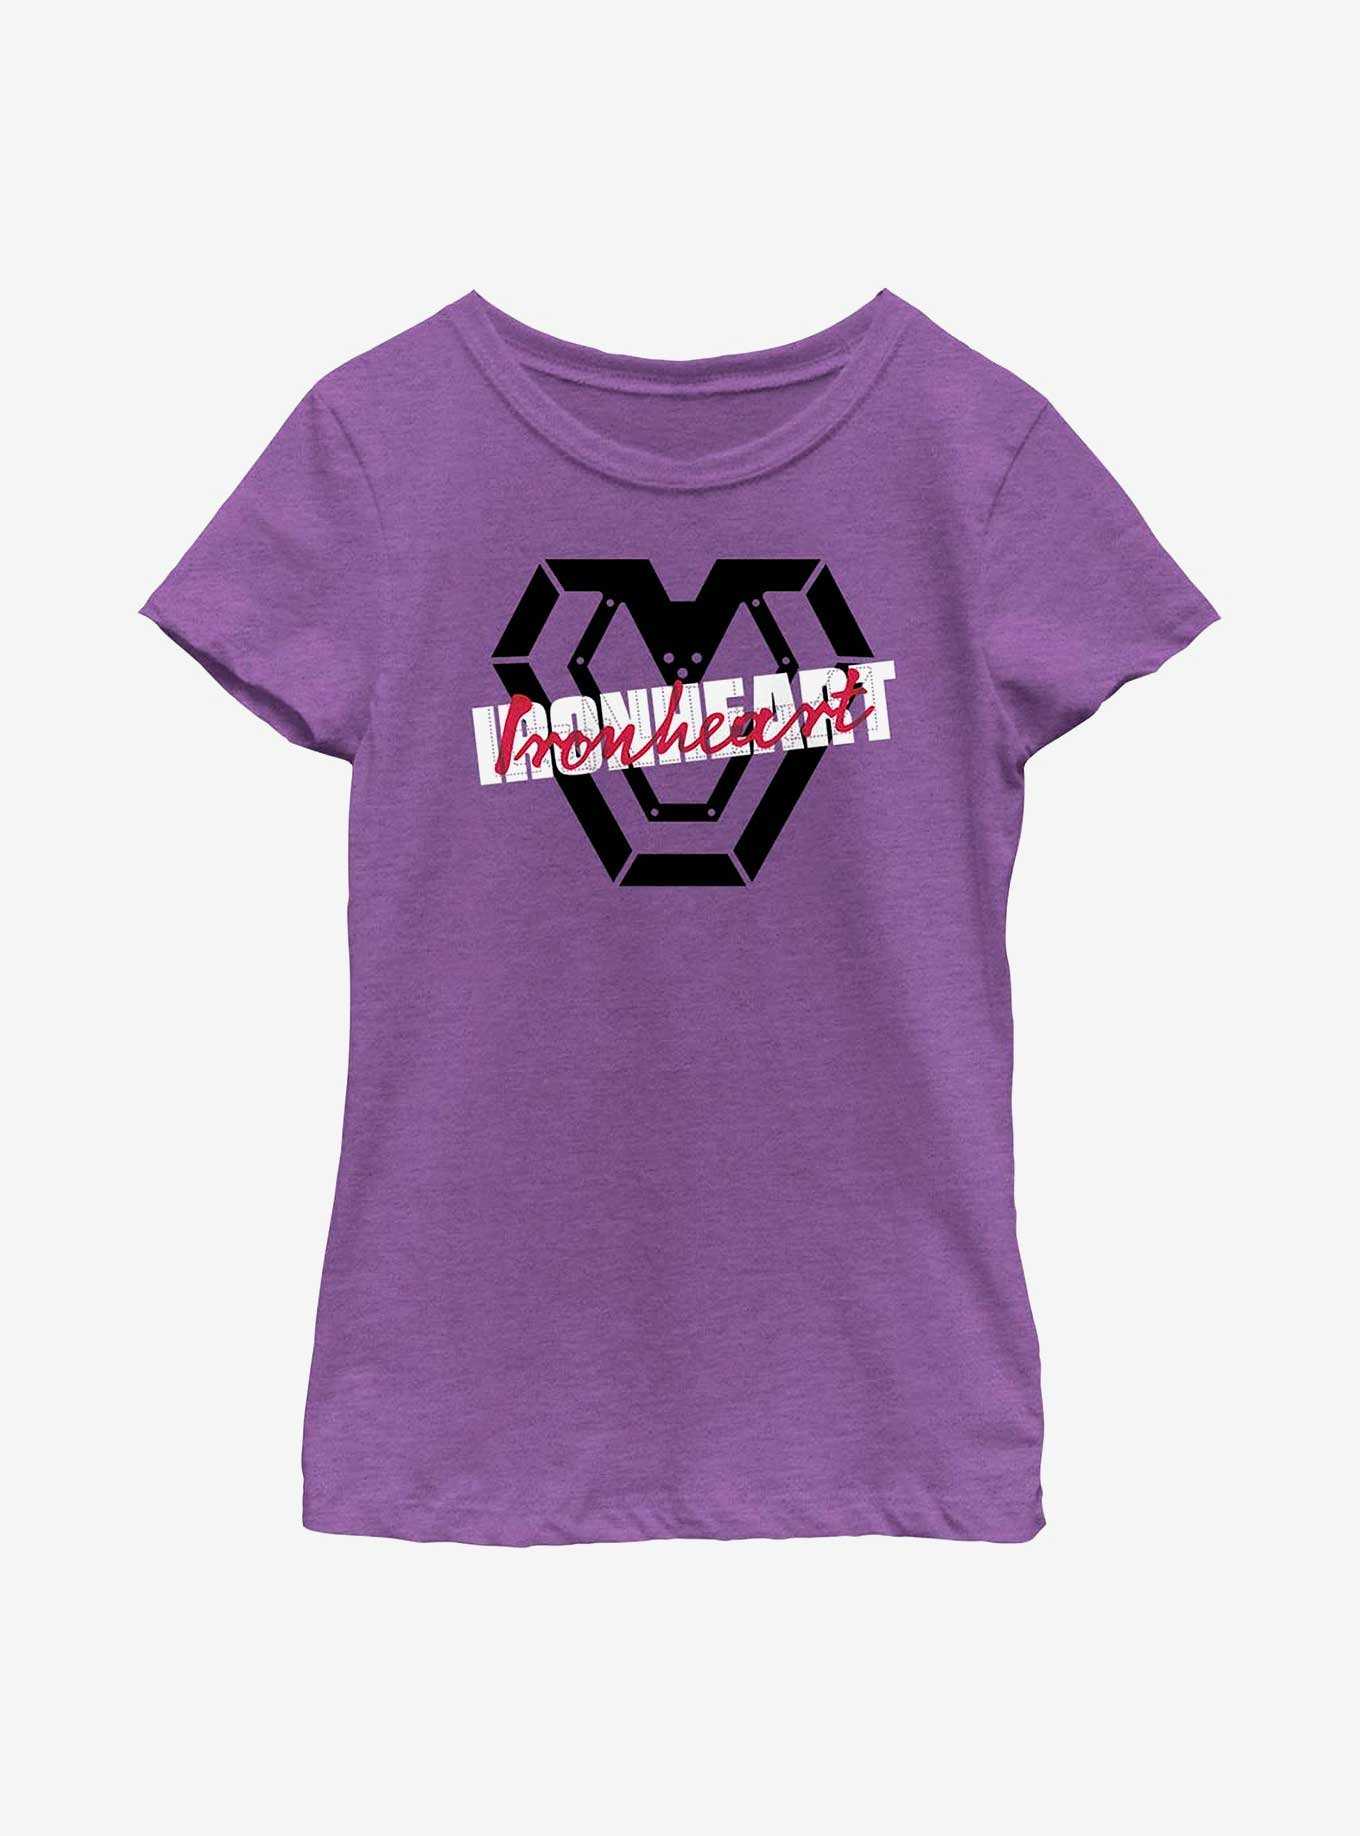 Marvel Black Panther: Wakanda Forever Ironheart Stencil Youth Girls T-Shirt, , hi-res